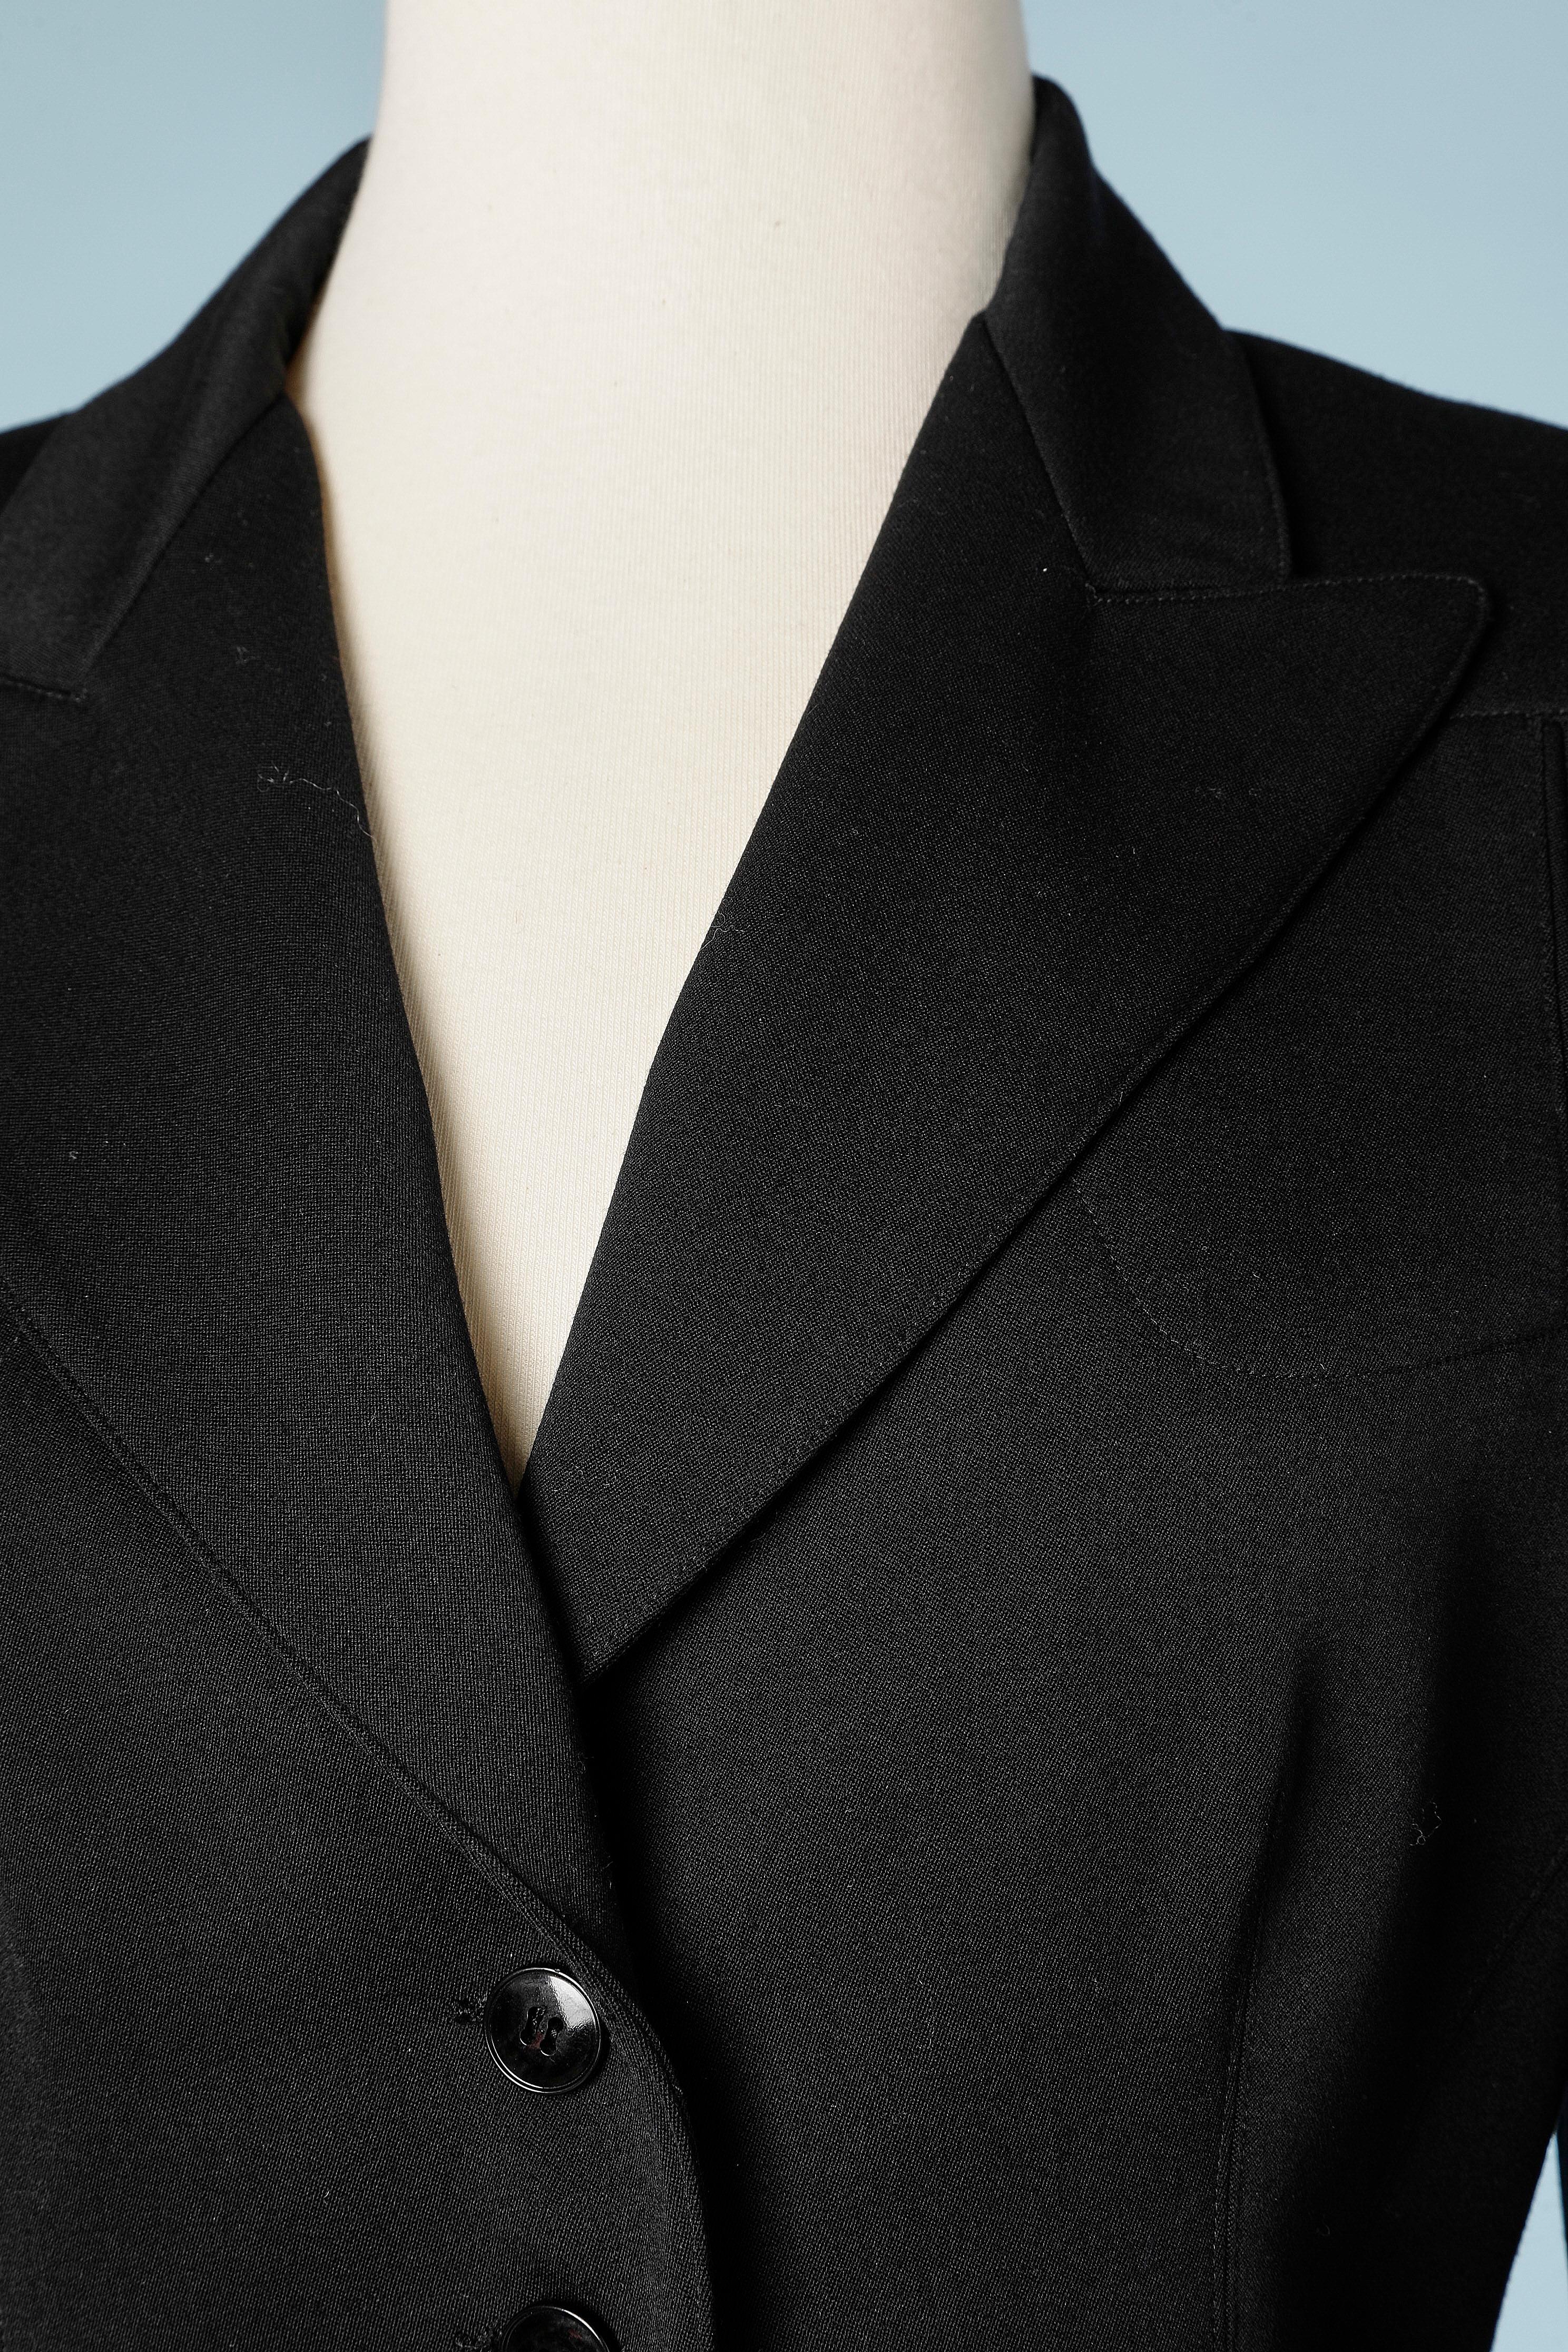 Black wool skirt-suit. Single breasted jacket and buttoned skirt. 
Shoulders pads.
SIZE 38 (M) 